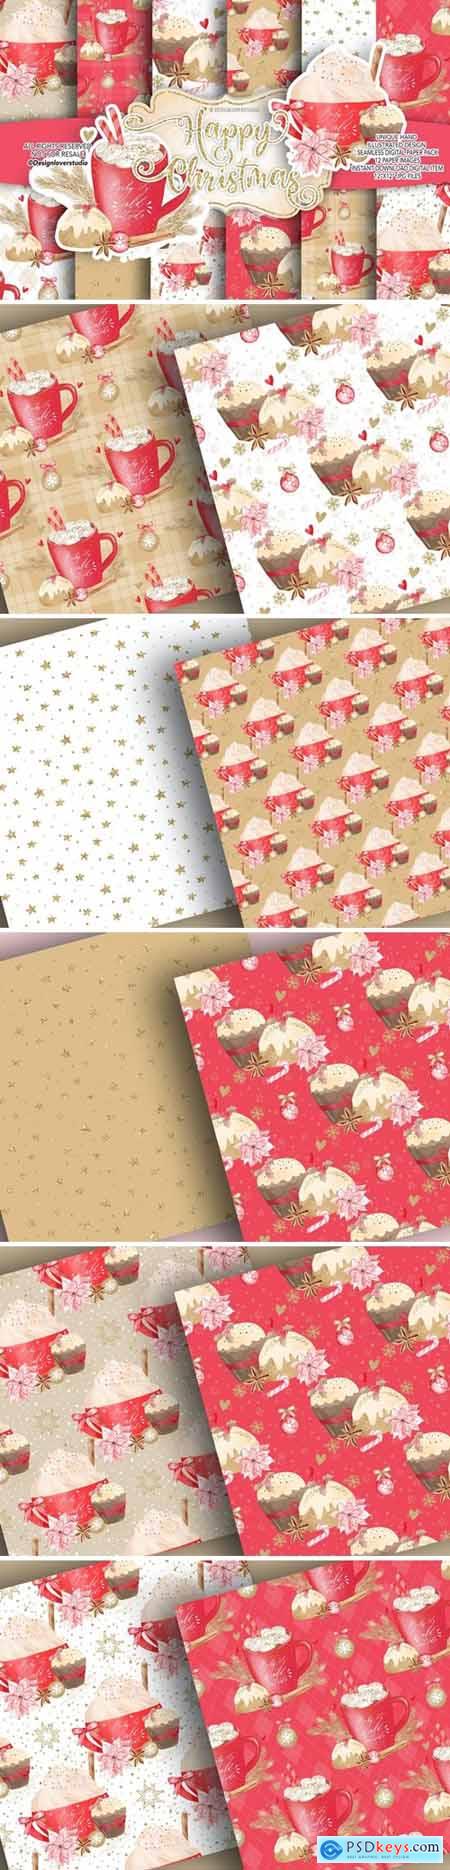 Baby its cold outside digital paper pack